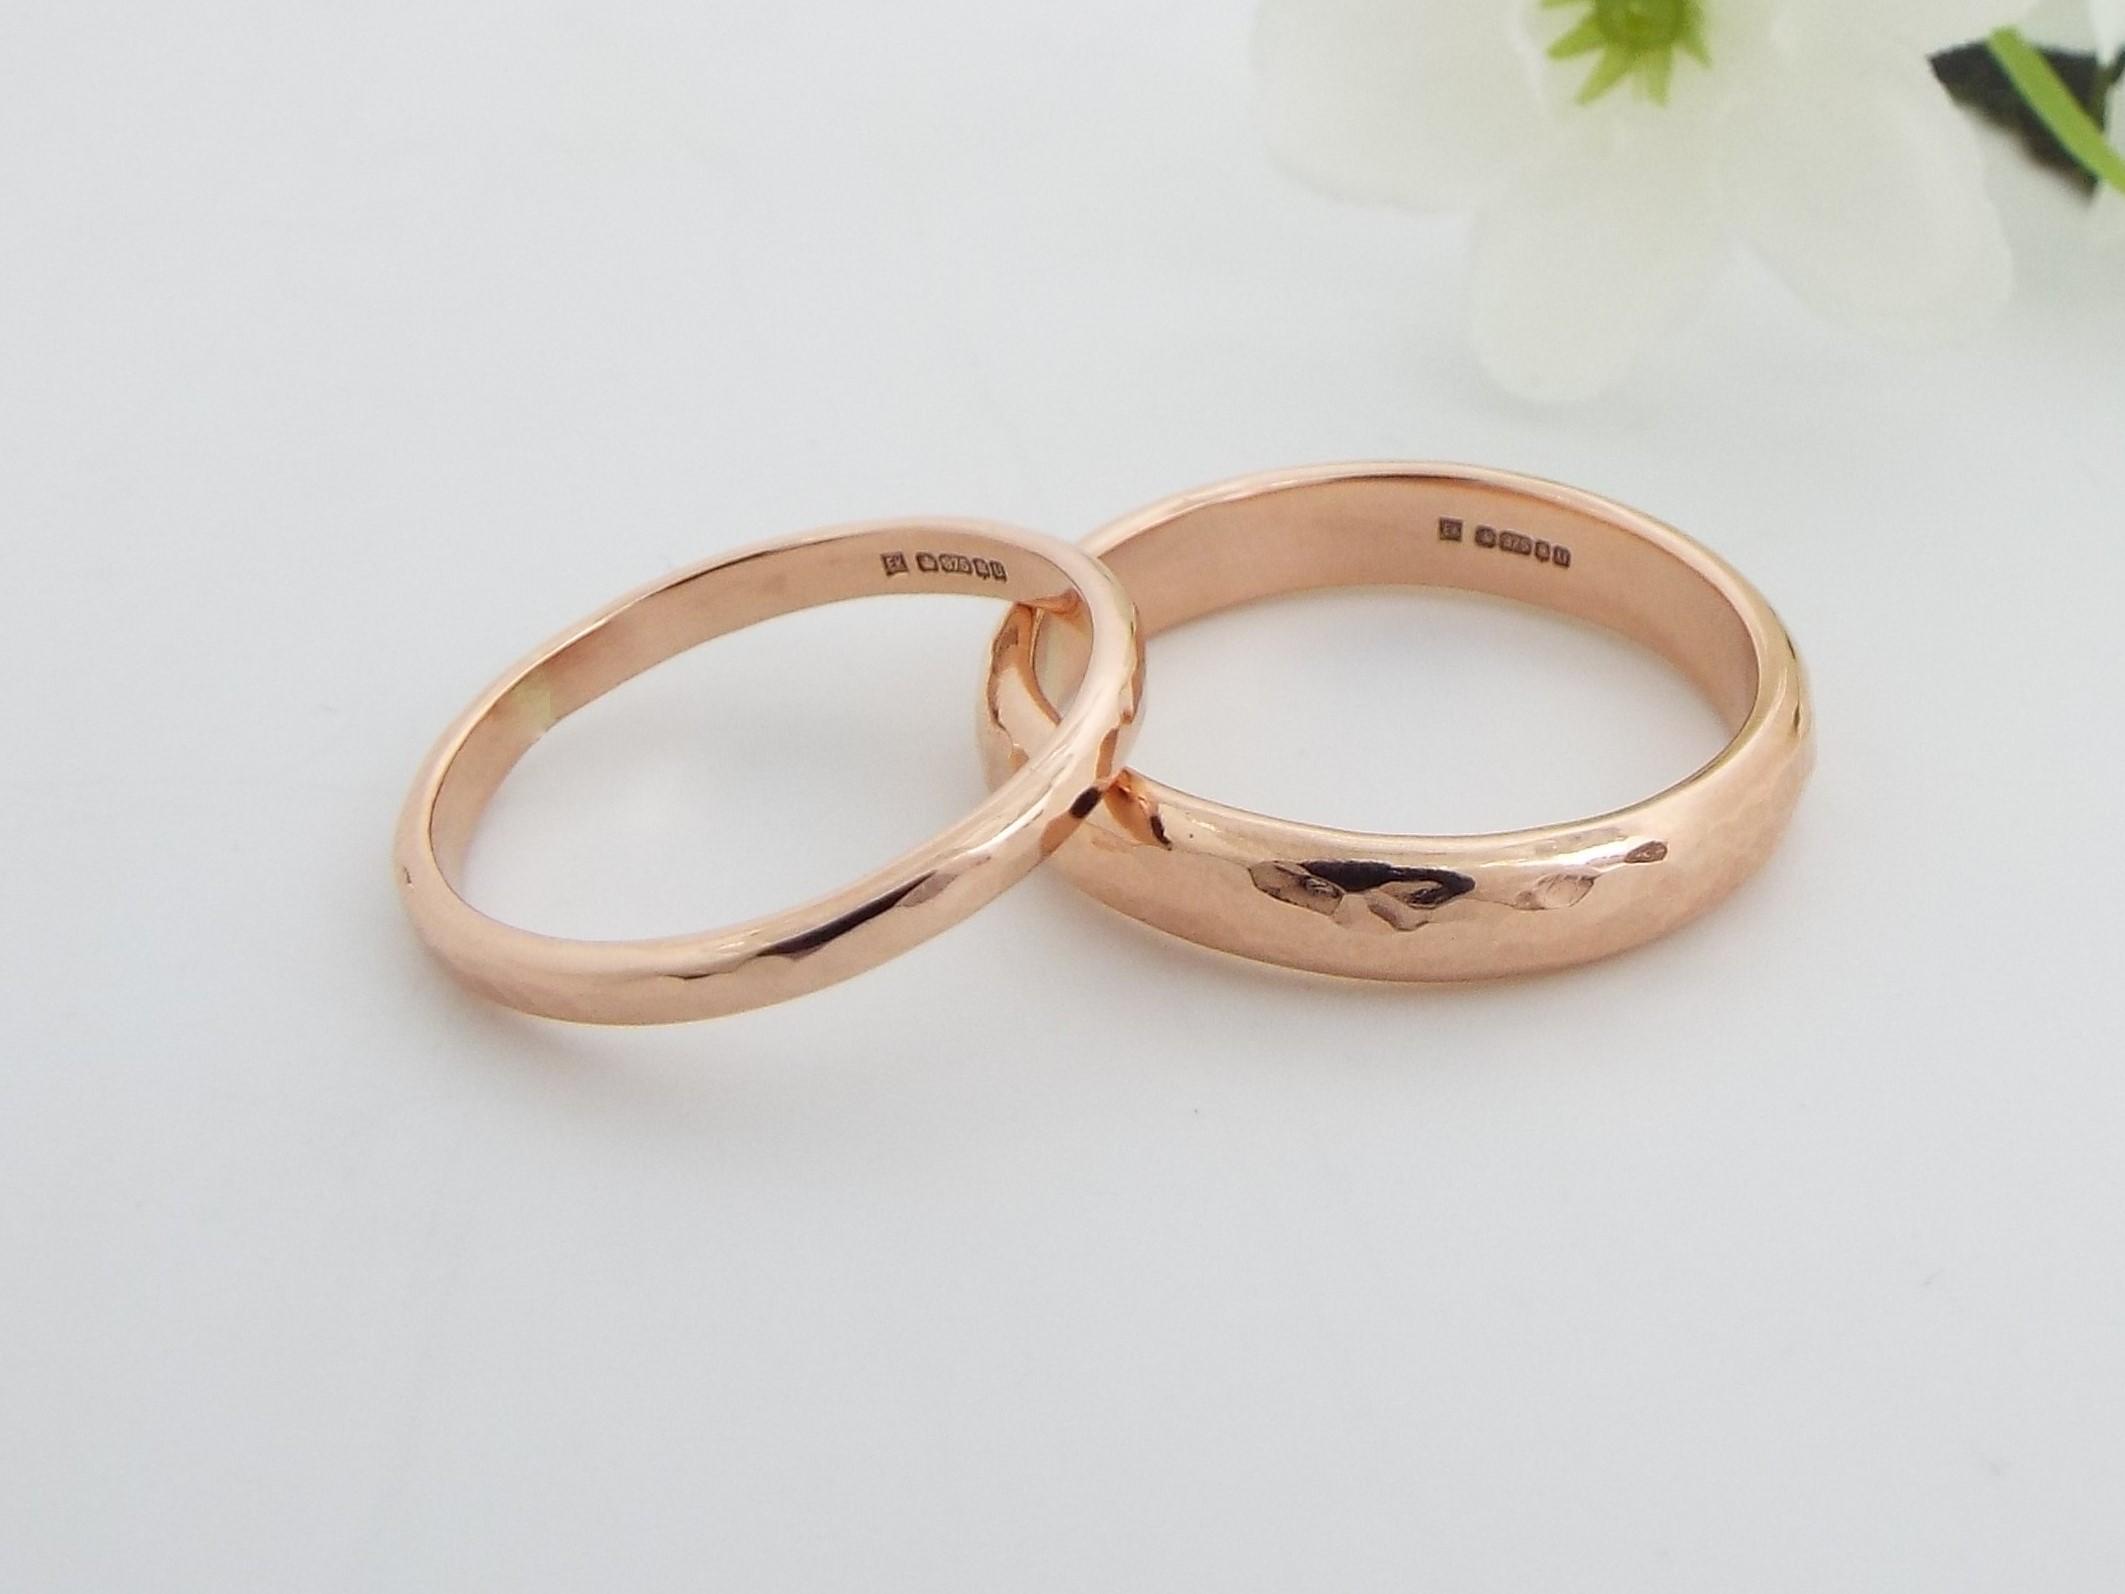 handmade his and hers rose gold wedding band set